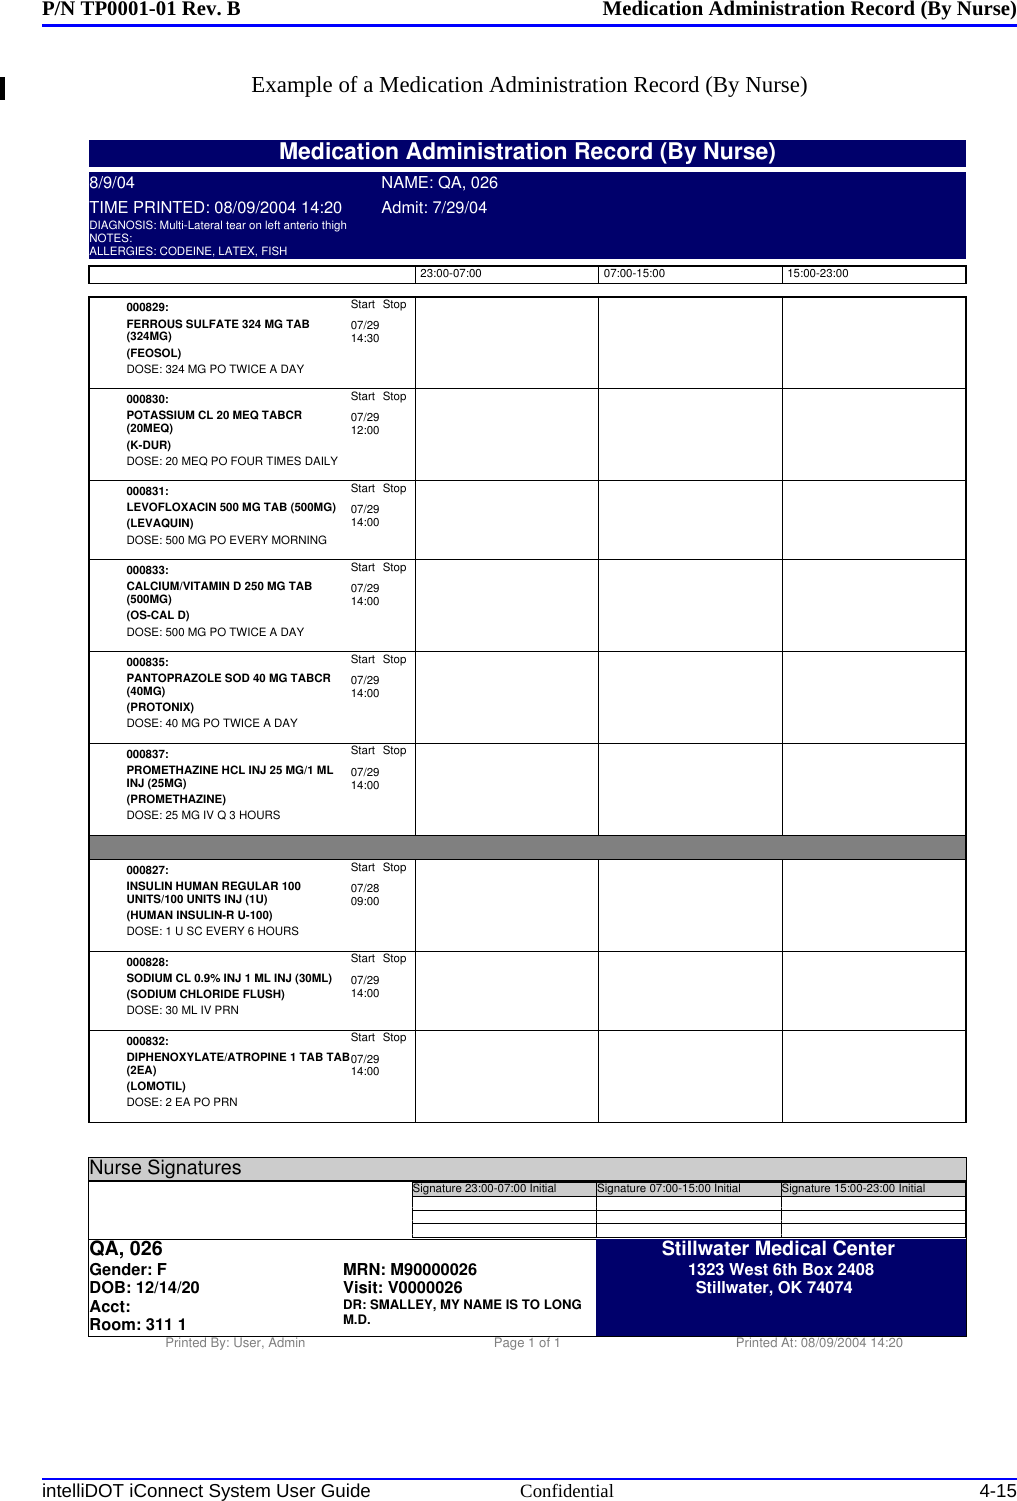 P/N TP0001-01 Rev. B Medication Administration Record (By Nurse)intelliDOT iConnect System User Guide Confidential 4-15Example of a Medication Administration Record (By Nurse)000829:FERROUS SULFATE 324 MG TAB(324MG)(FEOSOL)Start07/2914:30StopDOSE: 324 MG PO TWICE A DAY000830:POTASSIUM CL 20 MEQ TABCR(20MEQ)(K-DUR)Start07/2912:00StopDOSE: 20 MEQ PO FOUR TIMES DAILY000831:LEVOFLOXACIN 500 MG TAB (500MG)(LEVAQUIN)Start07/2914:00StopDOSE: 500 MG PO EVERY MORNING000833:CALCIUM/VITAMIN D 250 MG TAB(500MG)(OS-CAL D)Start07/2914:00StopDOSE: 500 MG PO TWICE A DAY000835:PANTOPRAZOLE SOD 40 MG TABCR(40MG)(PROTONIX)Start07/2914:00StopDOSE: 40 MG PO TWICE A DAY000837:PROMETHAZINE HCL INJ 25 MG/1 MLINJ (25MG)(PROMETHAZINE)Start07/2914:00StopDOSE: 25 MG IV Q 3 HOURS000827:INSULIN HUMAN REGULAR 100UNITS/100 UNITS INJ (1U)(HUMAN INSULIN-R U-100)Start07/2809:00StopDOSE:1USCEVERY 6 HOURS000828:SODIUM CL 0.9% INJ 1 ML INJ (30ML)(SODIUM CHLORIDE FLUSH)Start07/2914:00StopDOSE: 30 ML IV PRN000832:DIPHENOXYLATE/ATROPINE 1 TAB TAB(2EA)(LOMOTIL)Start07/2914:00StopDOSE: 2 EA PO PRNMedication Administration Record (By Nurse)8/9/04 NAME: QA, 026TIME PRINTED: 08/09/2004 14:20 Admit: 7/29/04DIAGNOSIS: Multi-Lateral tear on left anterio thighNOTES:ALLERGIES: CODEINE, LATEX, FISH23:00-07:00 07:00-15:00 15:00-23:00Nurse SignaturesSignature 23:00-07:00 Initial___Signature 07:00-15:00 Initial___Signature 15:00-23:00 Initial___QA, 026Gender: FDOB: 12/14/20 MRN: M90000026Visit: V0000026Acct:DR: SMALLEY, MY NAME IS TO LONGM.D.Room: 311 1Stillwater Medical Center1323 West 6th Box 2408Stillwater, OK 74074Printed By: User, Admin Page 1 of 1 Printed At: 08/09/2004 14:20